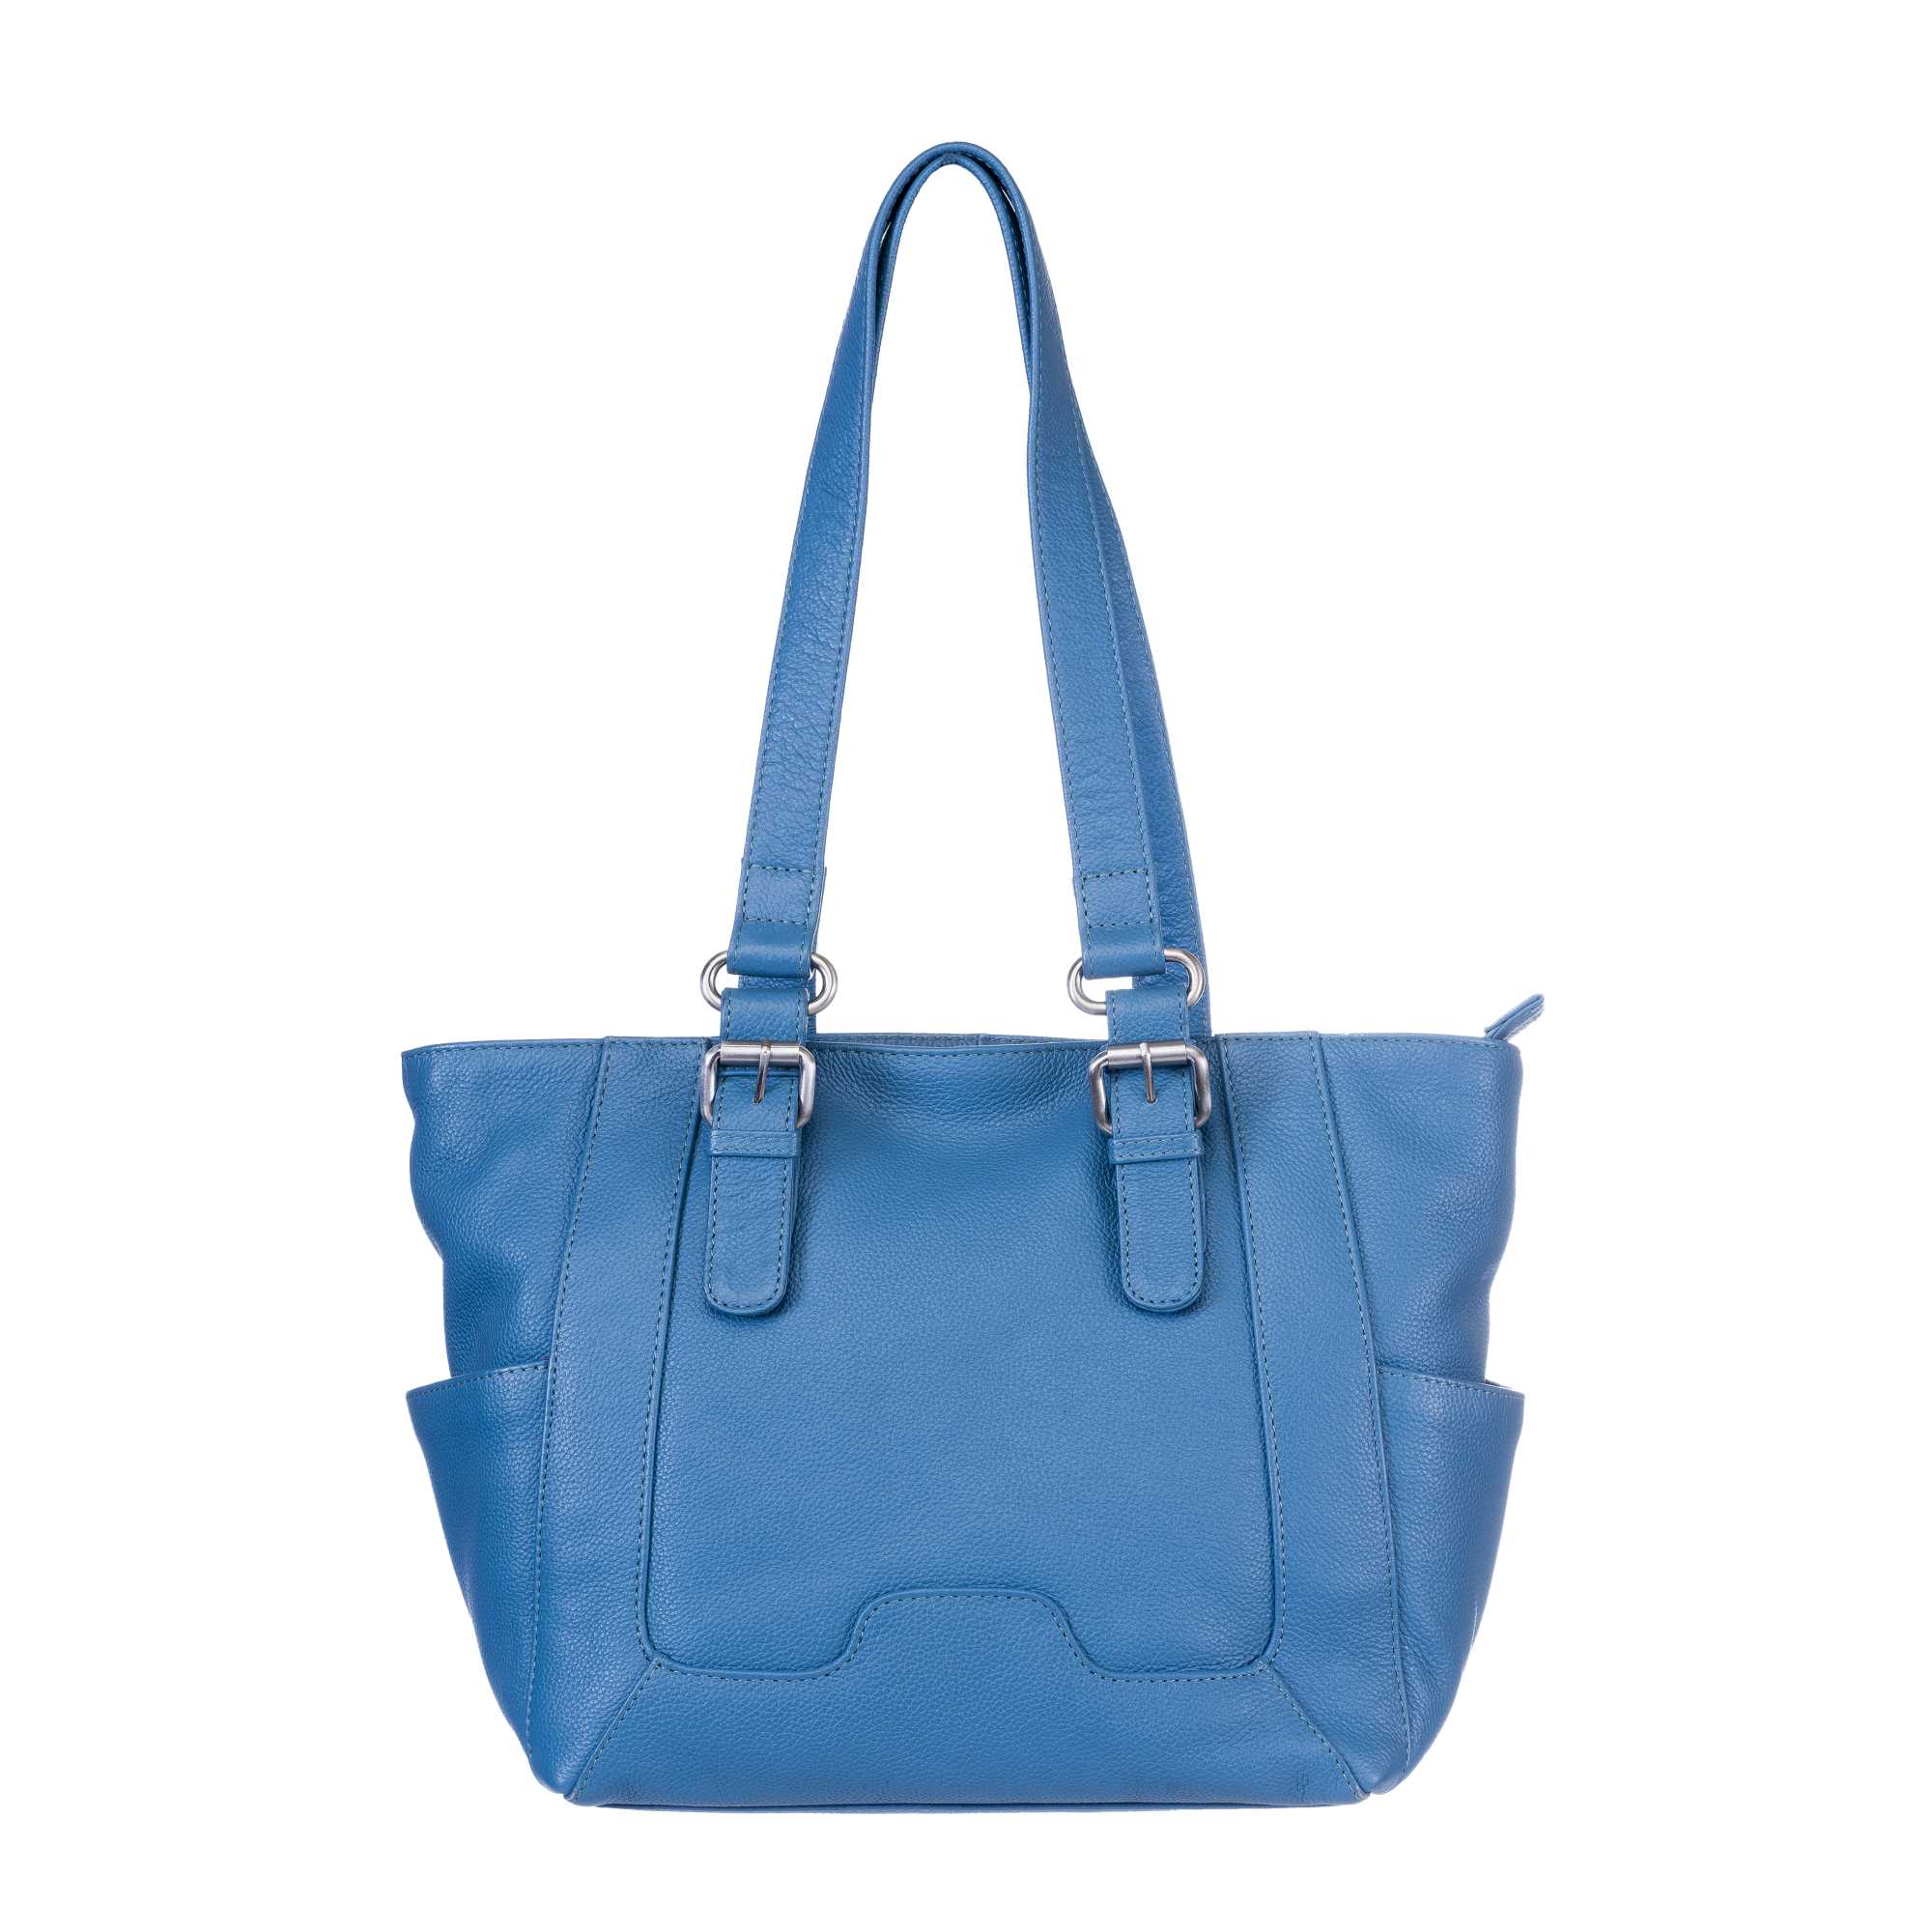 Shop Finest Blue Tote Bags At Best Prices Online In India